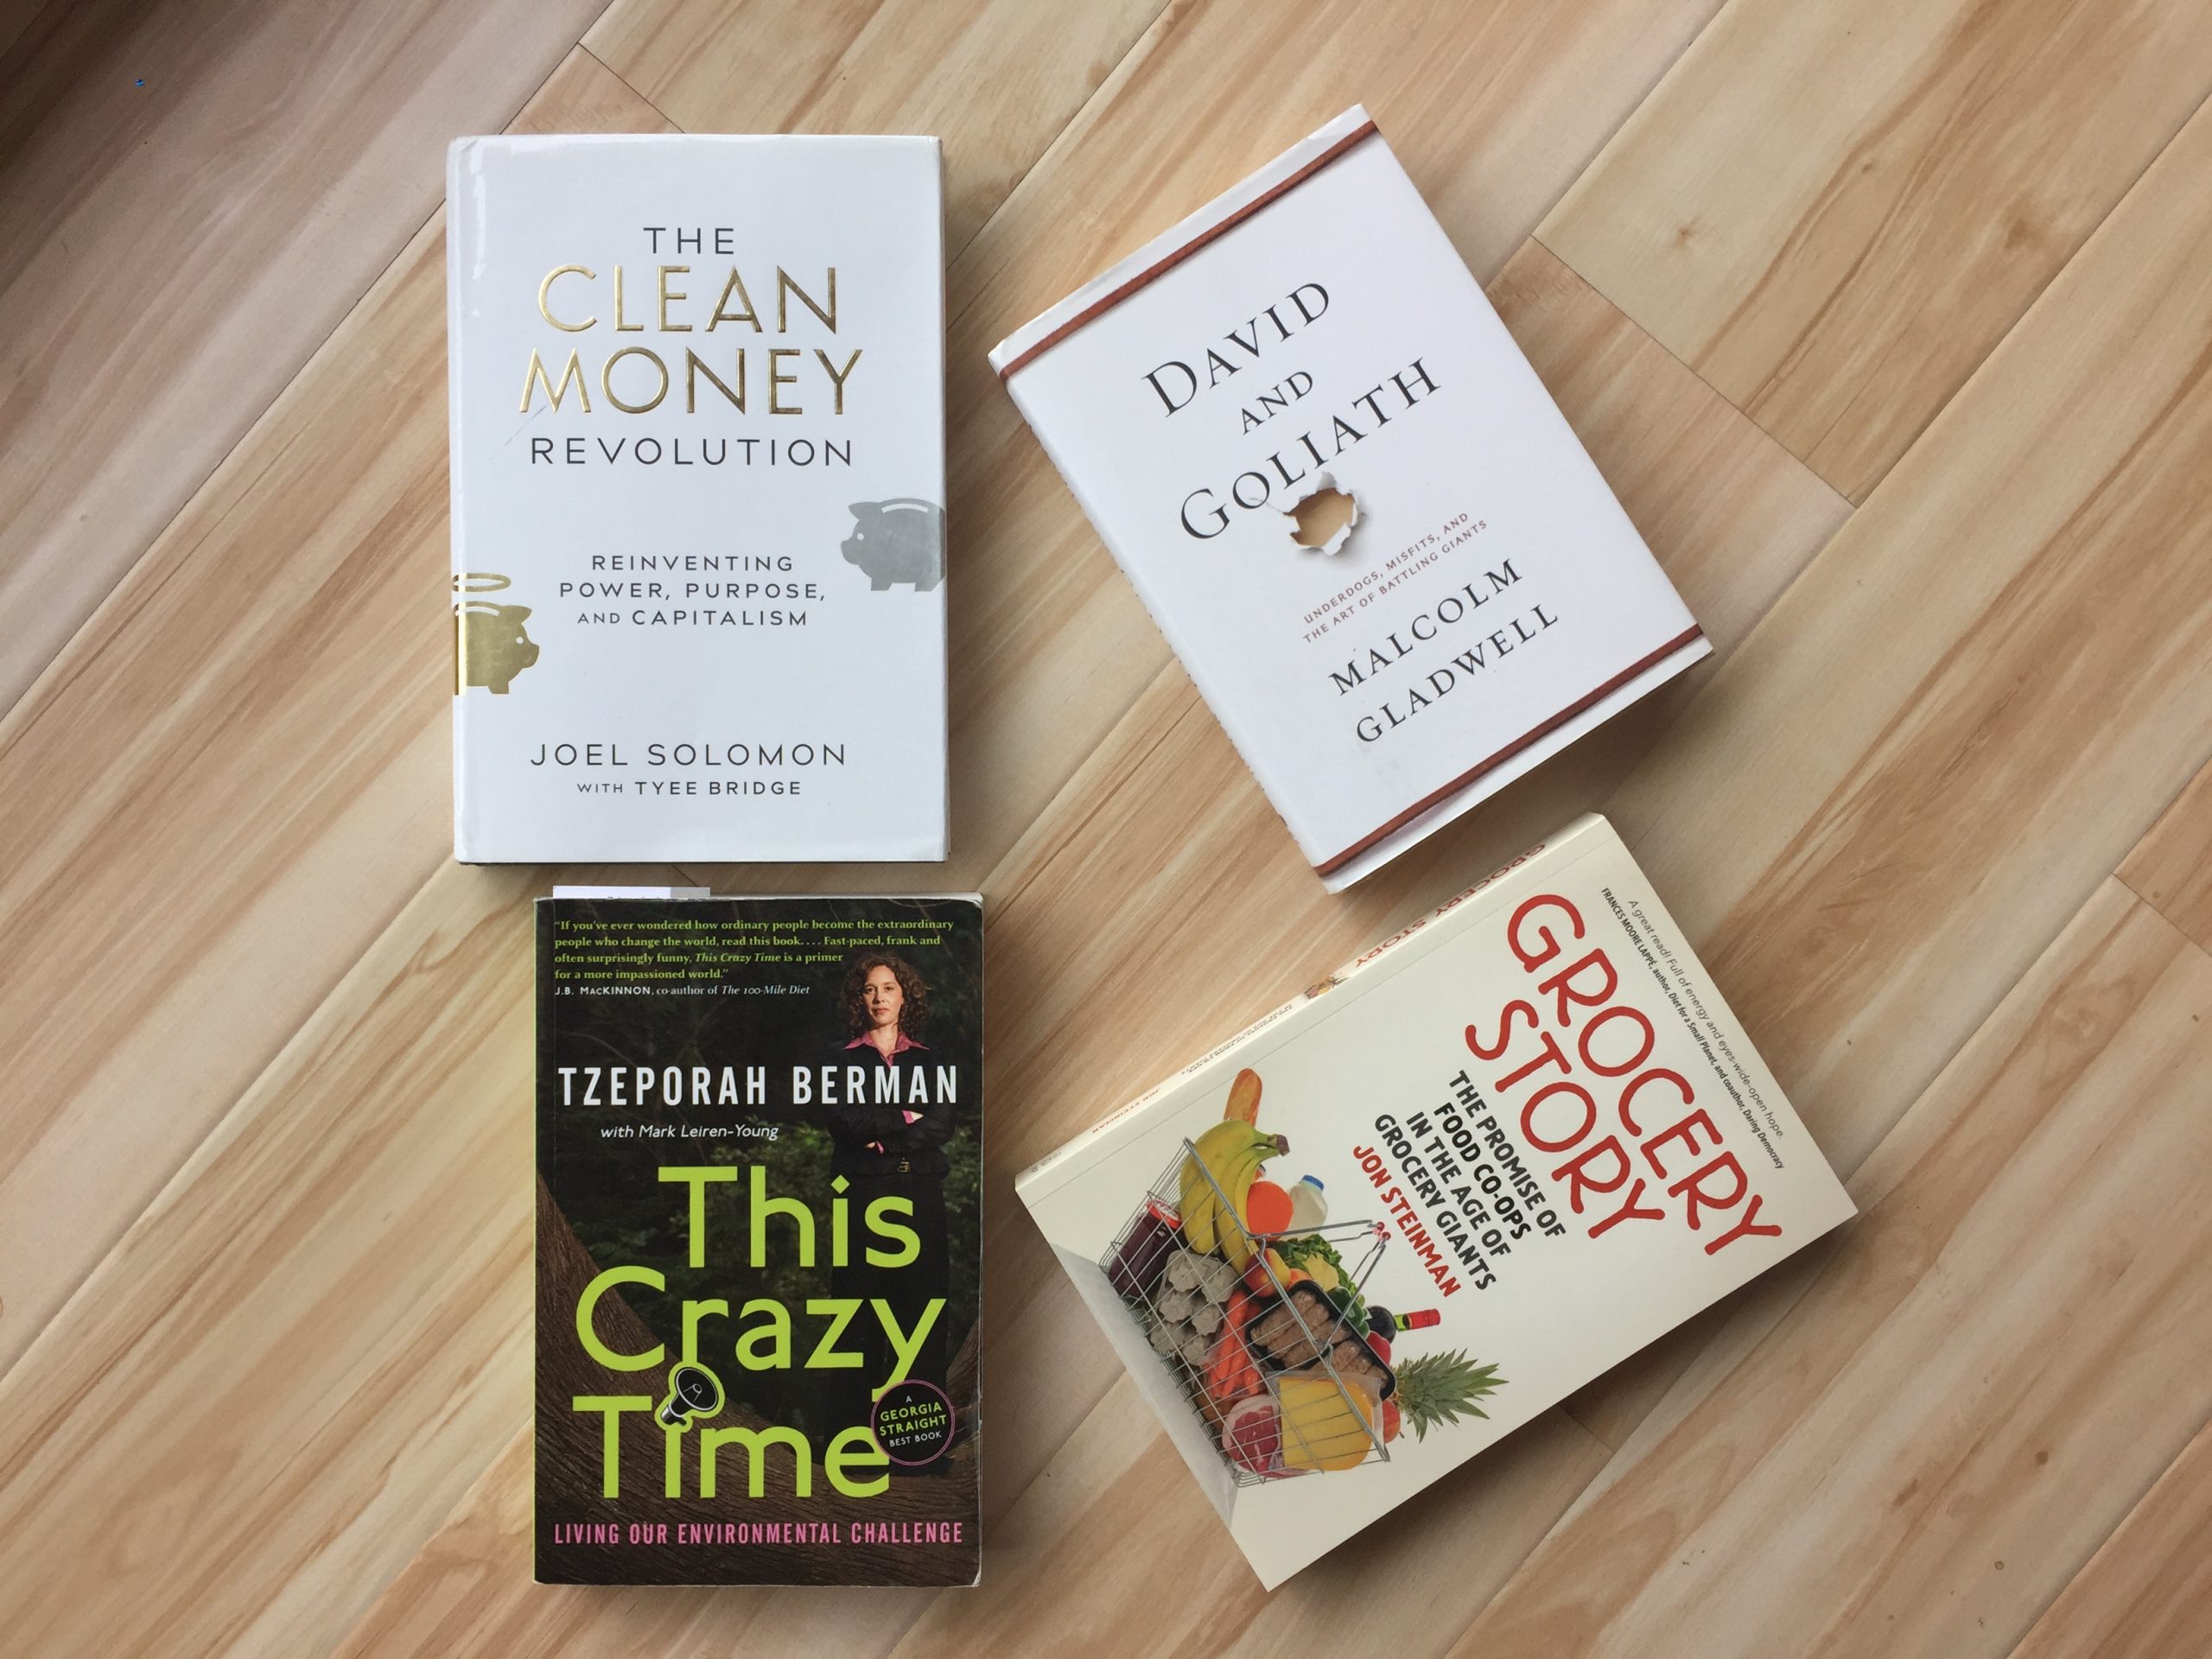 green-themed books that tackle sustainability topics with collaboration in mind, all written by Canadian authors. Titles include: clean money revolution by joel solomon, david and goliath by malcolm gladwell, this crazy time by tzeporah berman, and grocery story by jon steinman.